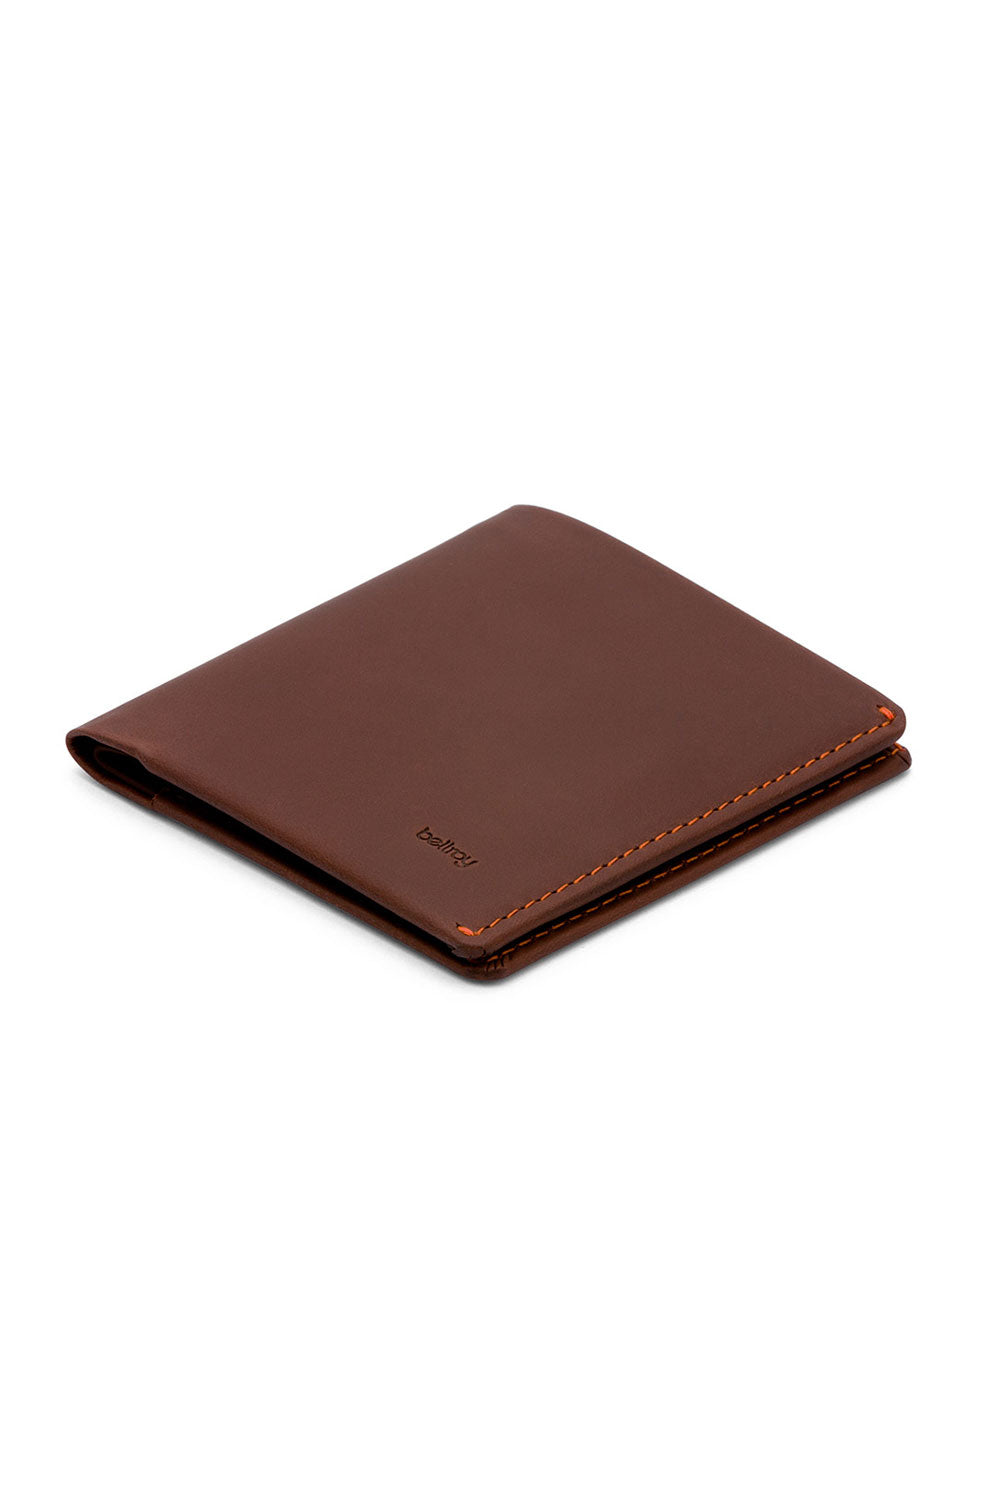 Bellroy - RFID Note Sleeve Wallet - Cocoa